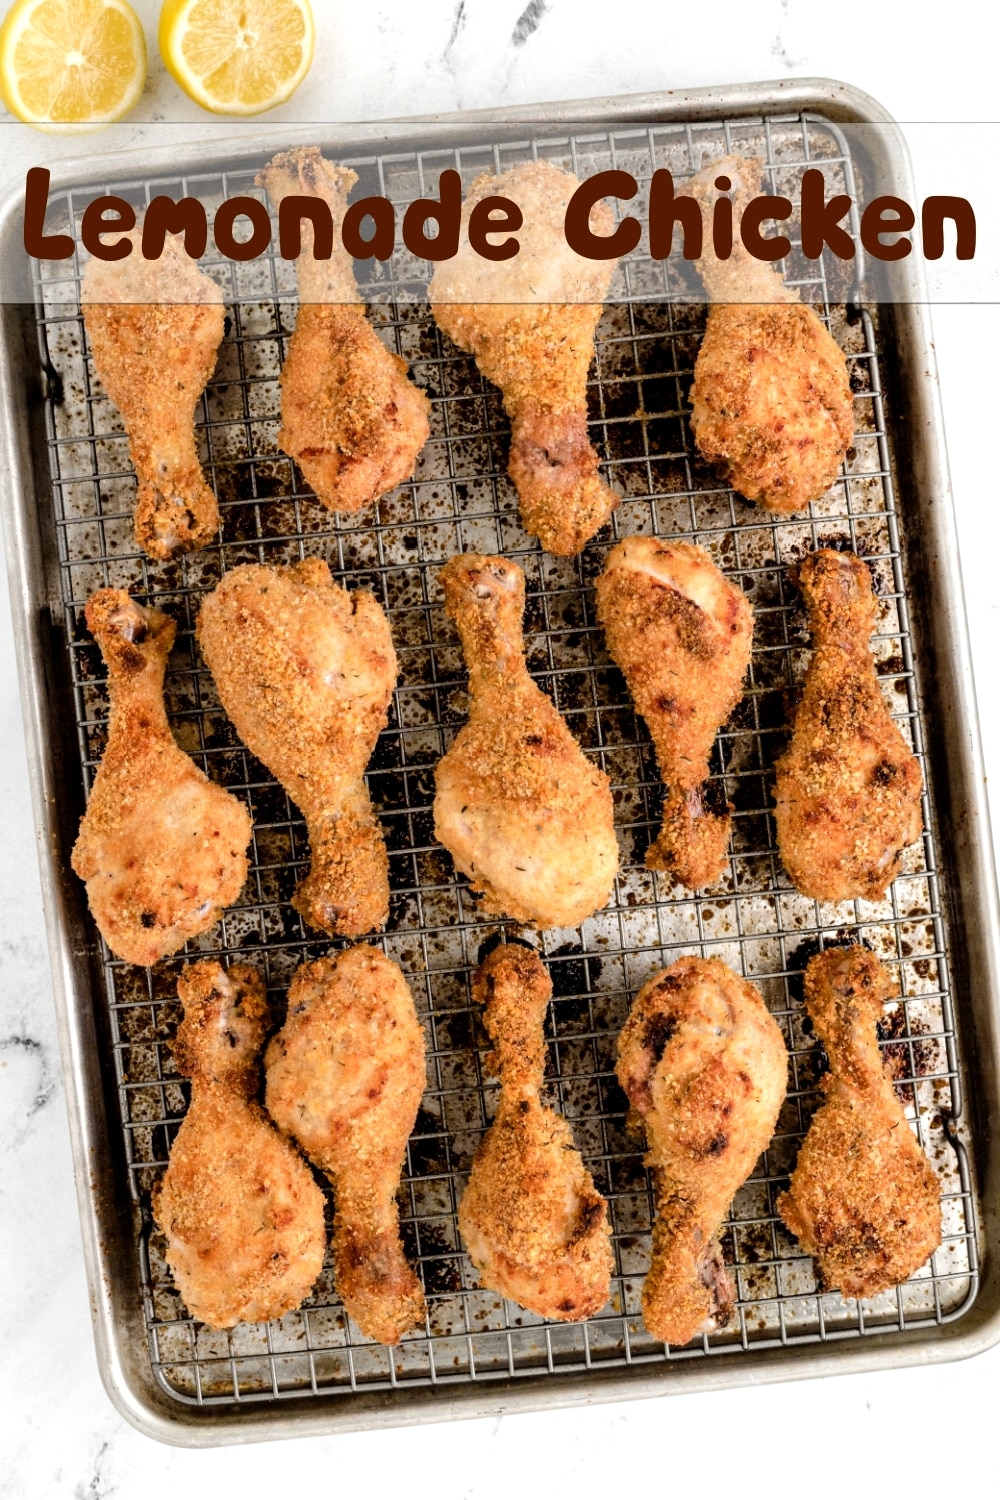 Looking for a mouthwatering chicken dinner idea? Try these baked Crunchy Lemonade Chicken Drumsticks made with creamy buttermilk. These crispy and tangy drumsticks will take you on a flavor adventure. Perfectly seasoned and coated in a crunchy coating, these drumsticks will be a hit at your next gathering. Get ready to enjoy a delicious baked dinner recipe that combines the zesty freshness of lemon, with the irresistible crunchy Panko coating.  via @cmpollak1